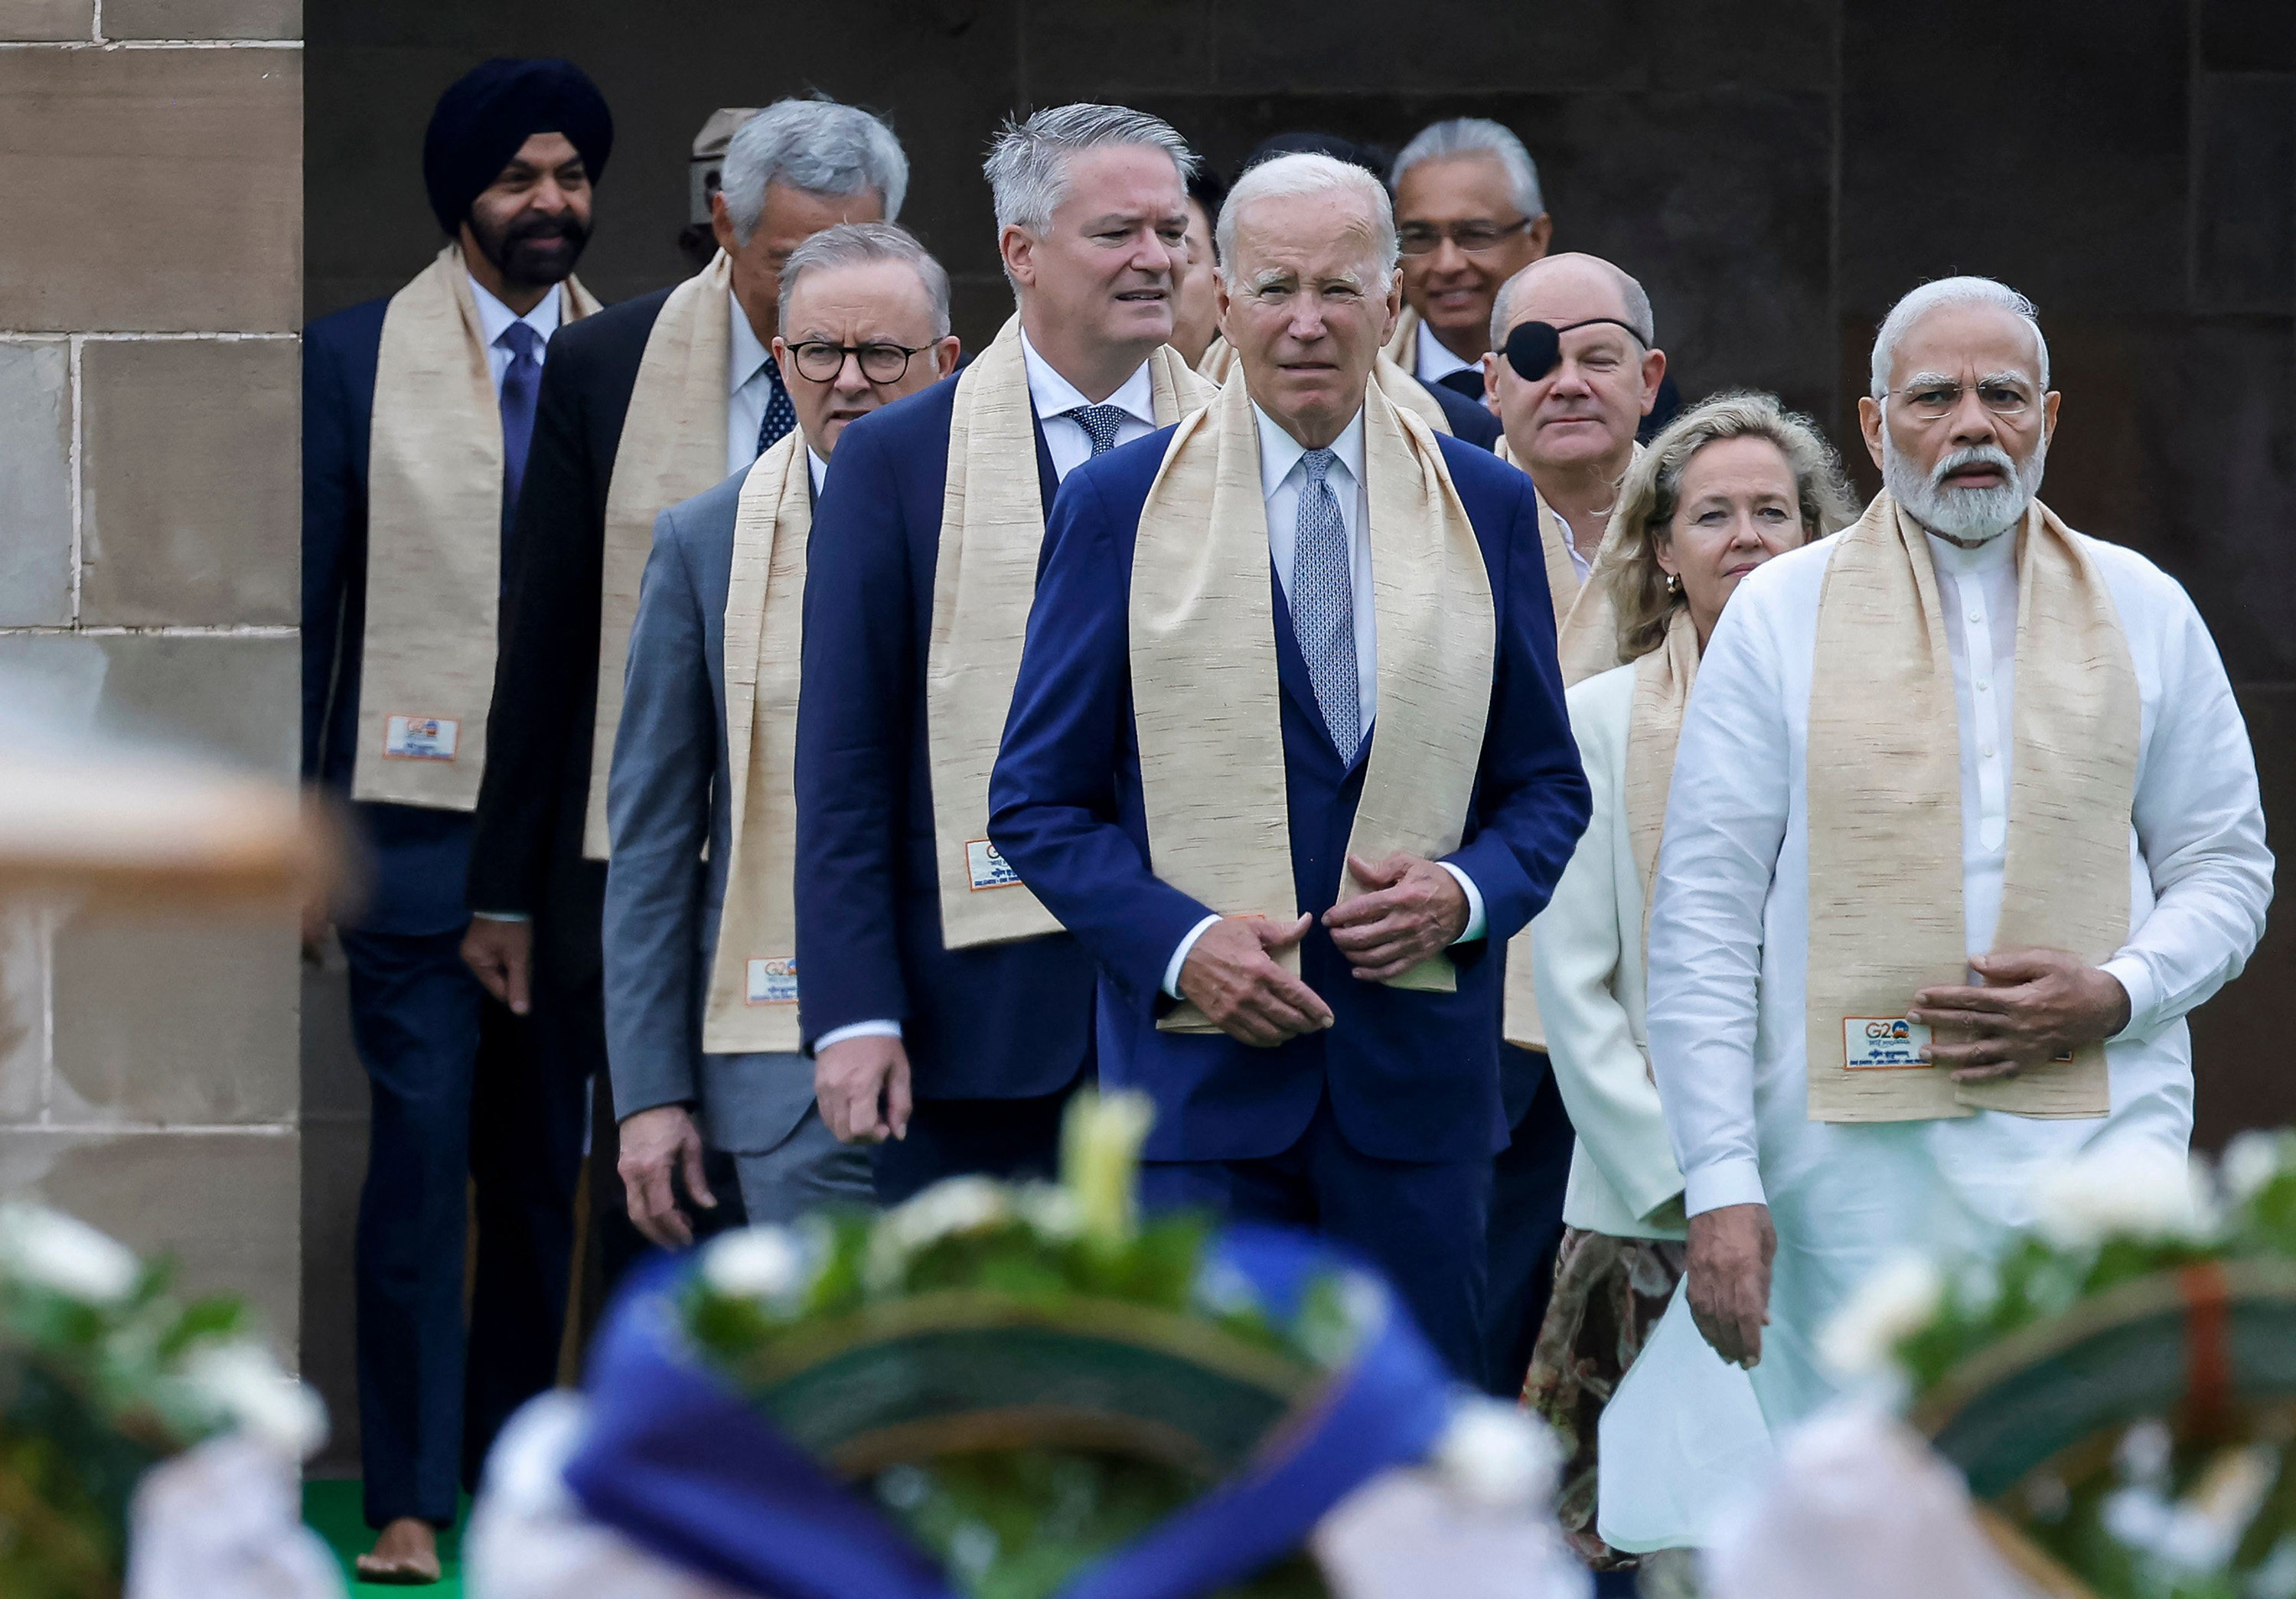 India’s Prime Minister Narendra Modi (right), US President Joe Biden (centre) and other world leaders arrive to pay respects at the Mahatma Gandhi memorial at Raj Ghat, on the sidelines of the G20 summit in New Delhi on September 10. Photo: Pool / AFP  /Getty Images / TNS